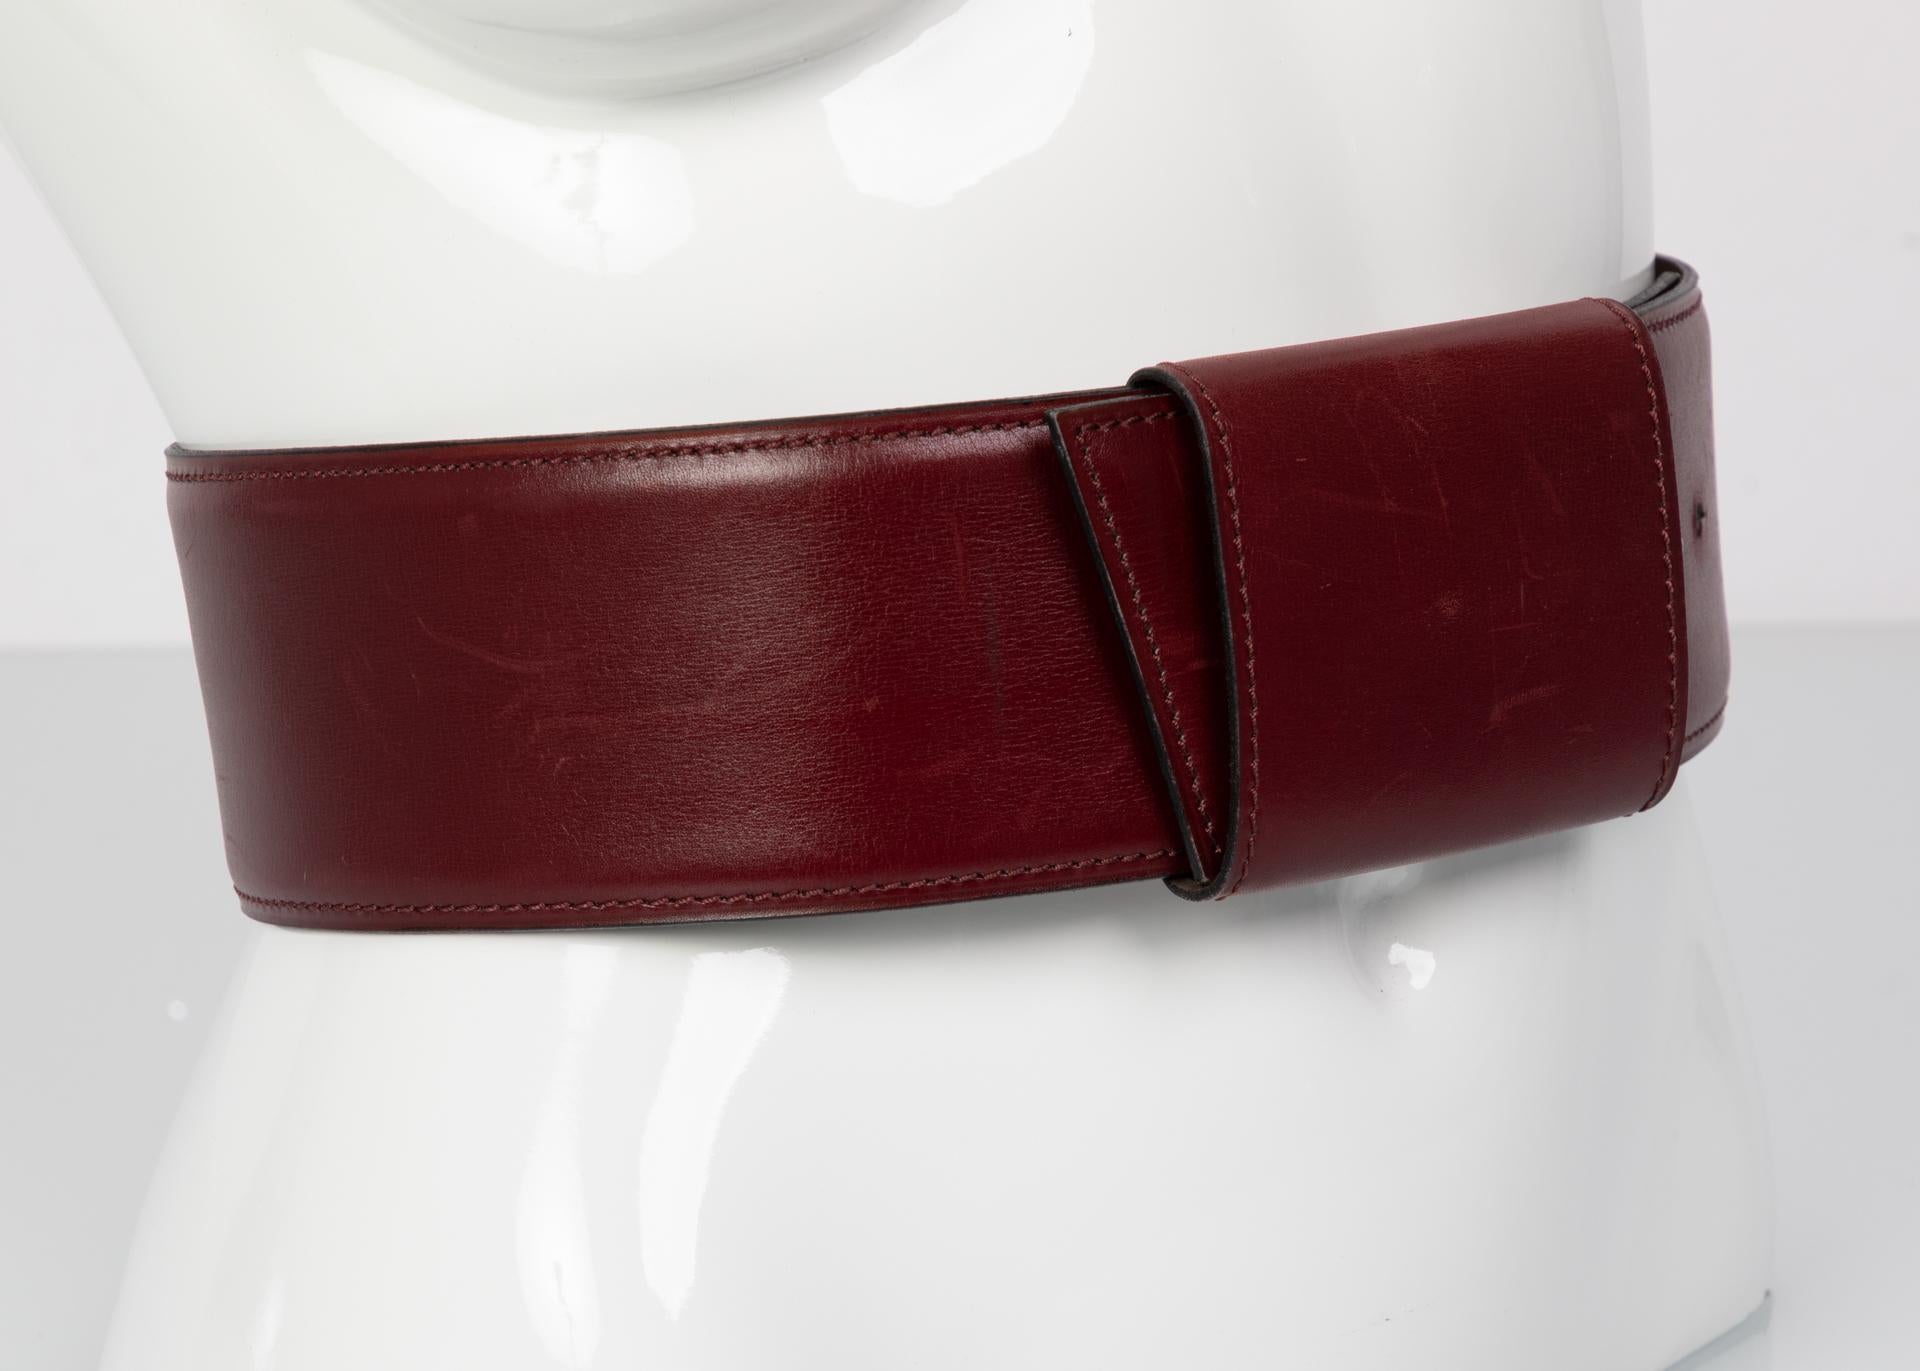 Bordeaux leather Alaïa waist belt with tonal stitching and peg-in-hole pull-through closure.
In very good condition, with minor wear to leather.

Measurements:
Length Min: 26 inches
Length Max: 28 inches
Width: 2.75 inches